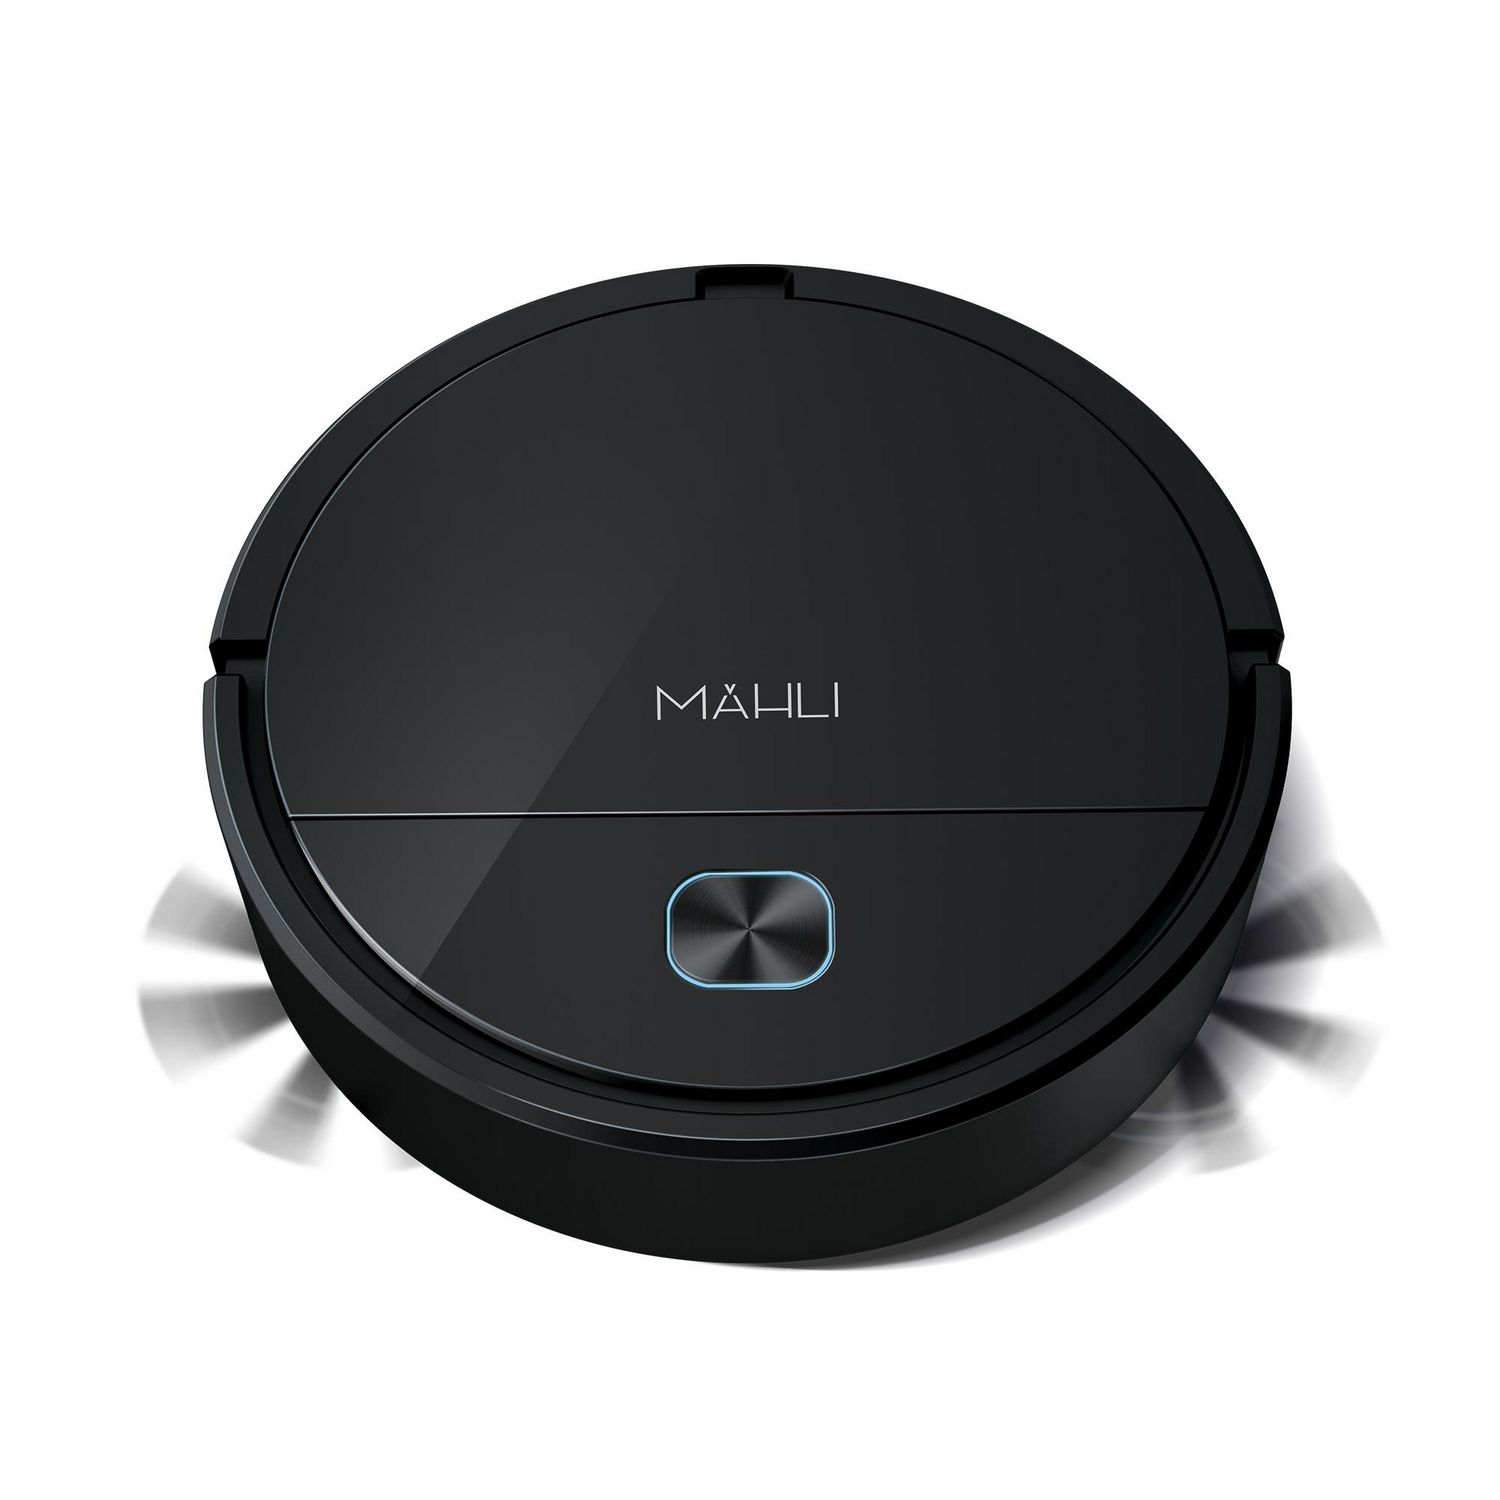 Mahli Robotic 3-In-1 Vacuum Cleaner: An Overview